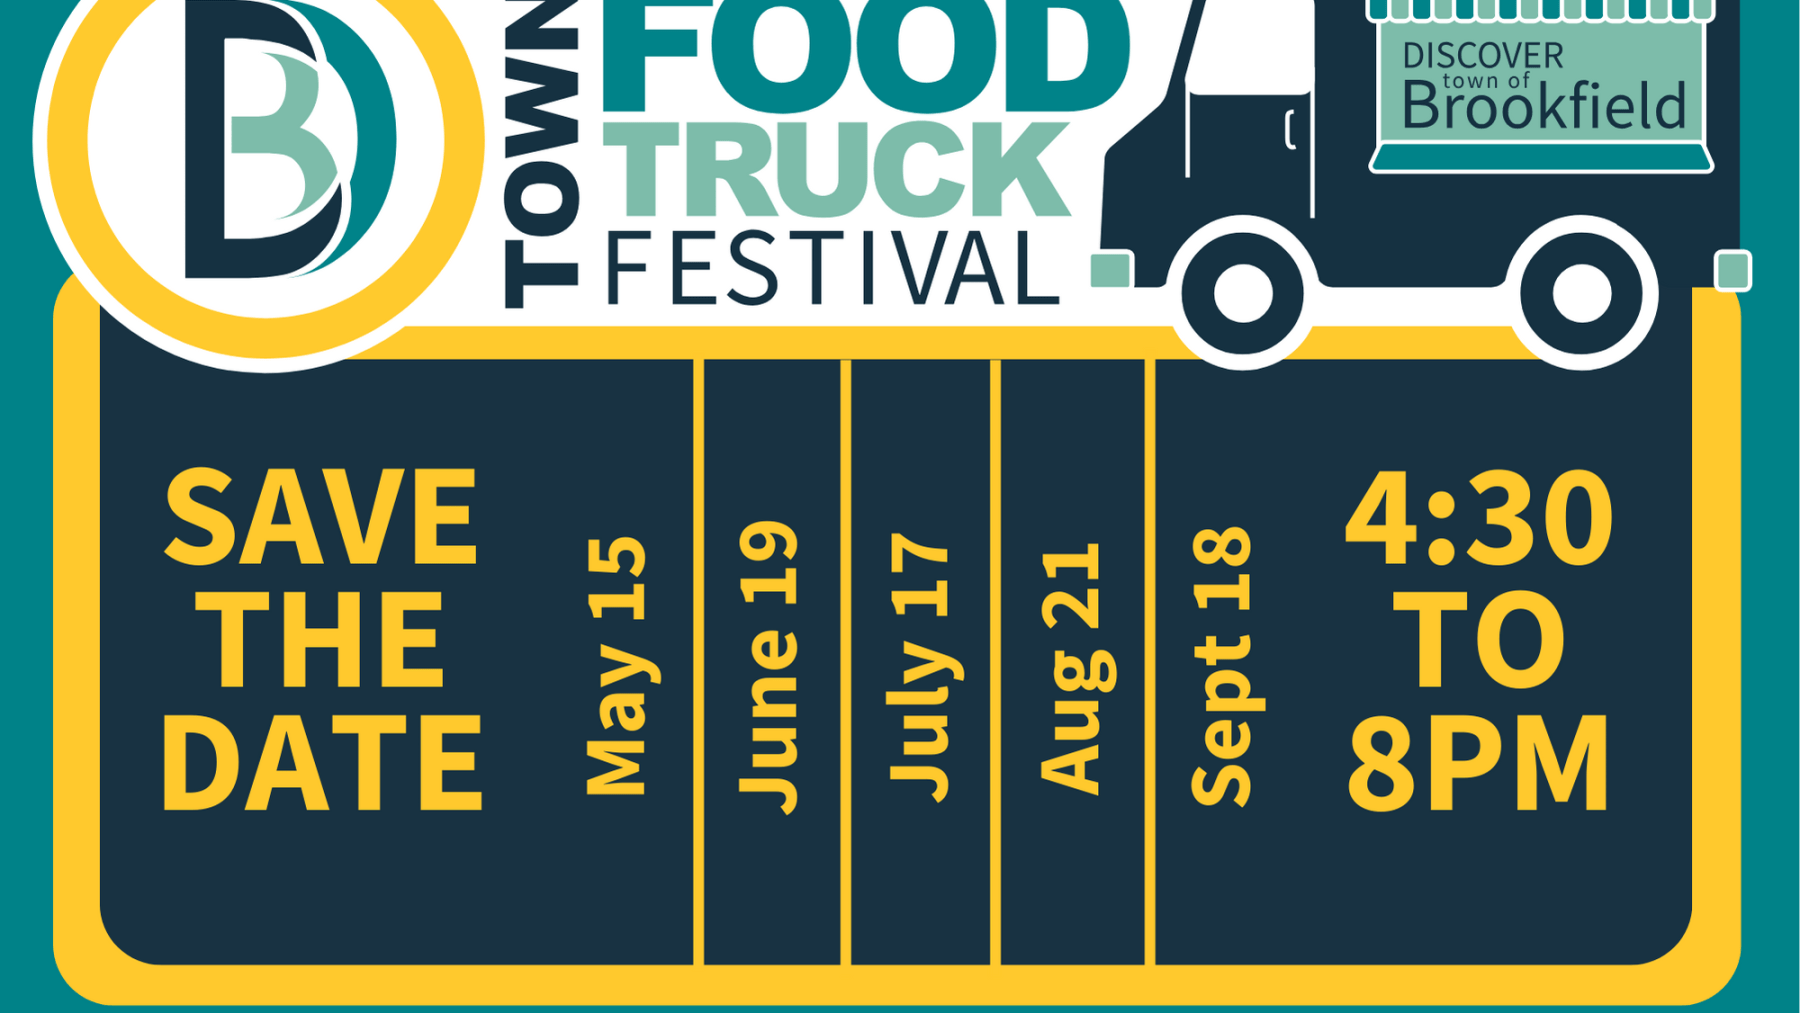 Article: Town Food Truck Festival